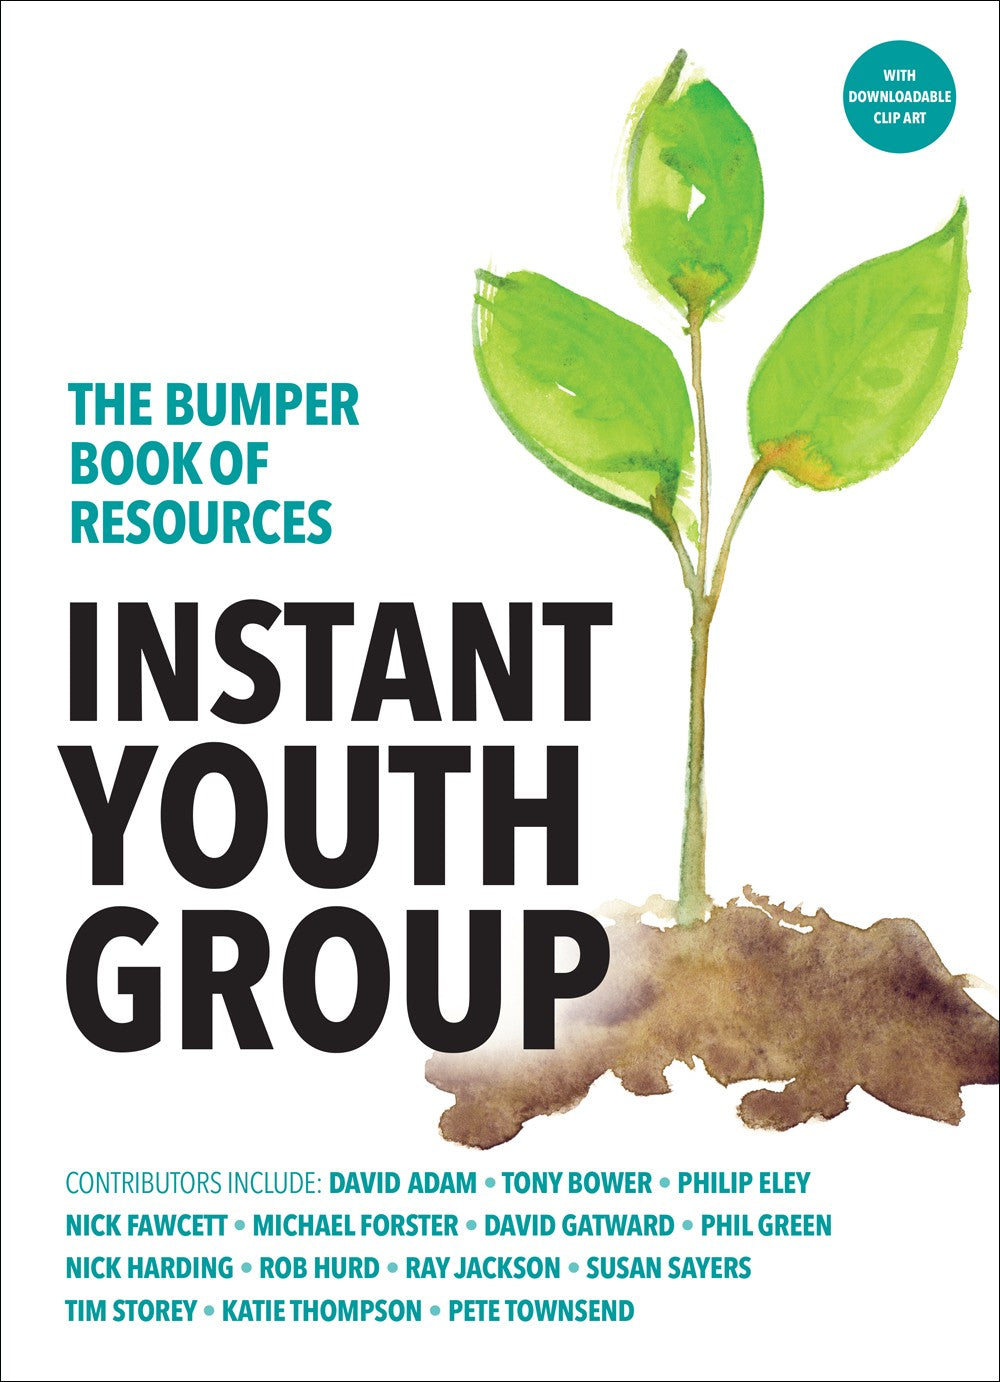 Image of Instant Youth Group Bumper Book of Resources other